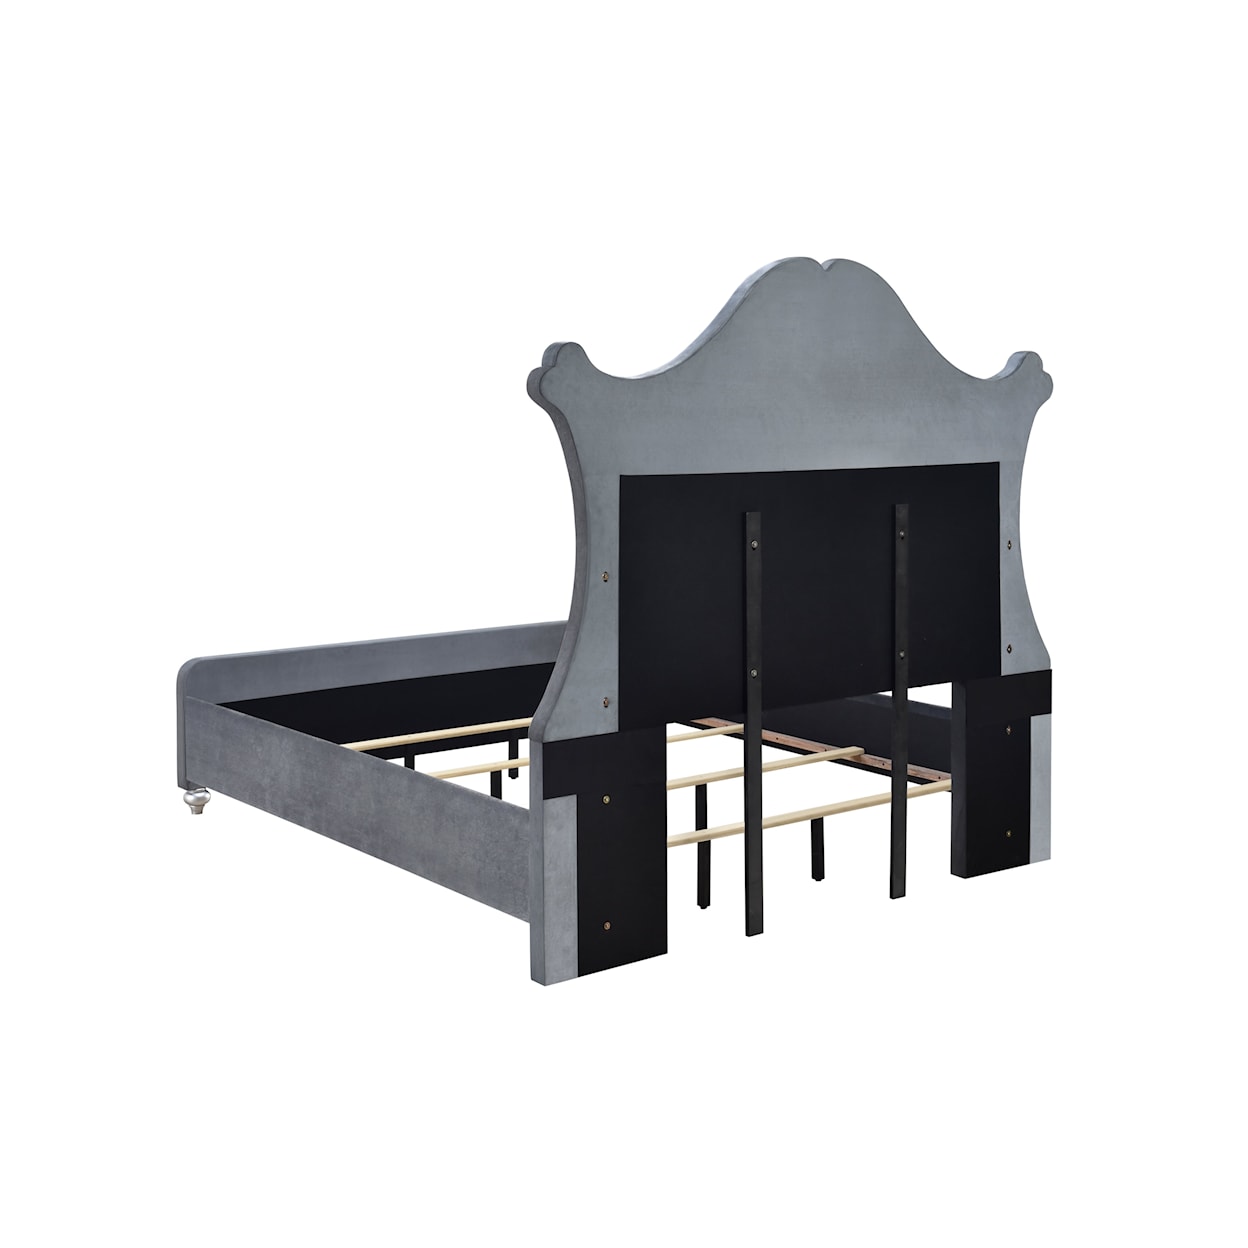 CM CAMEO Queen Upholstered Bed